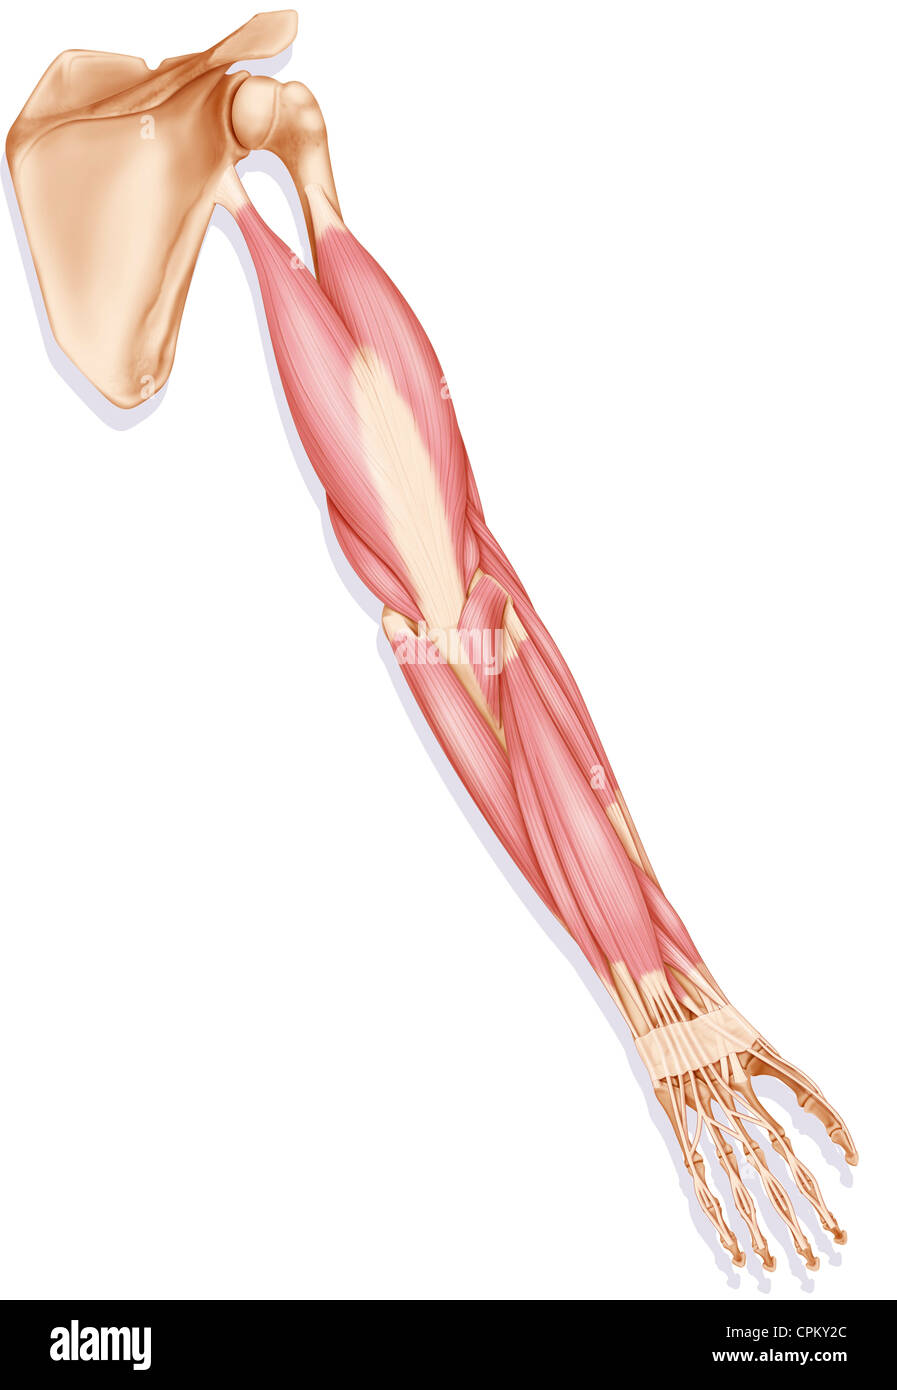 ARM MUSCLE, DRAWING Stock Photo